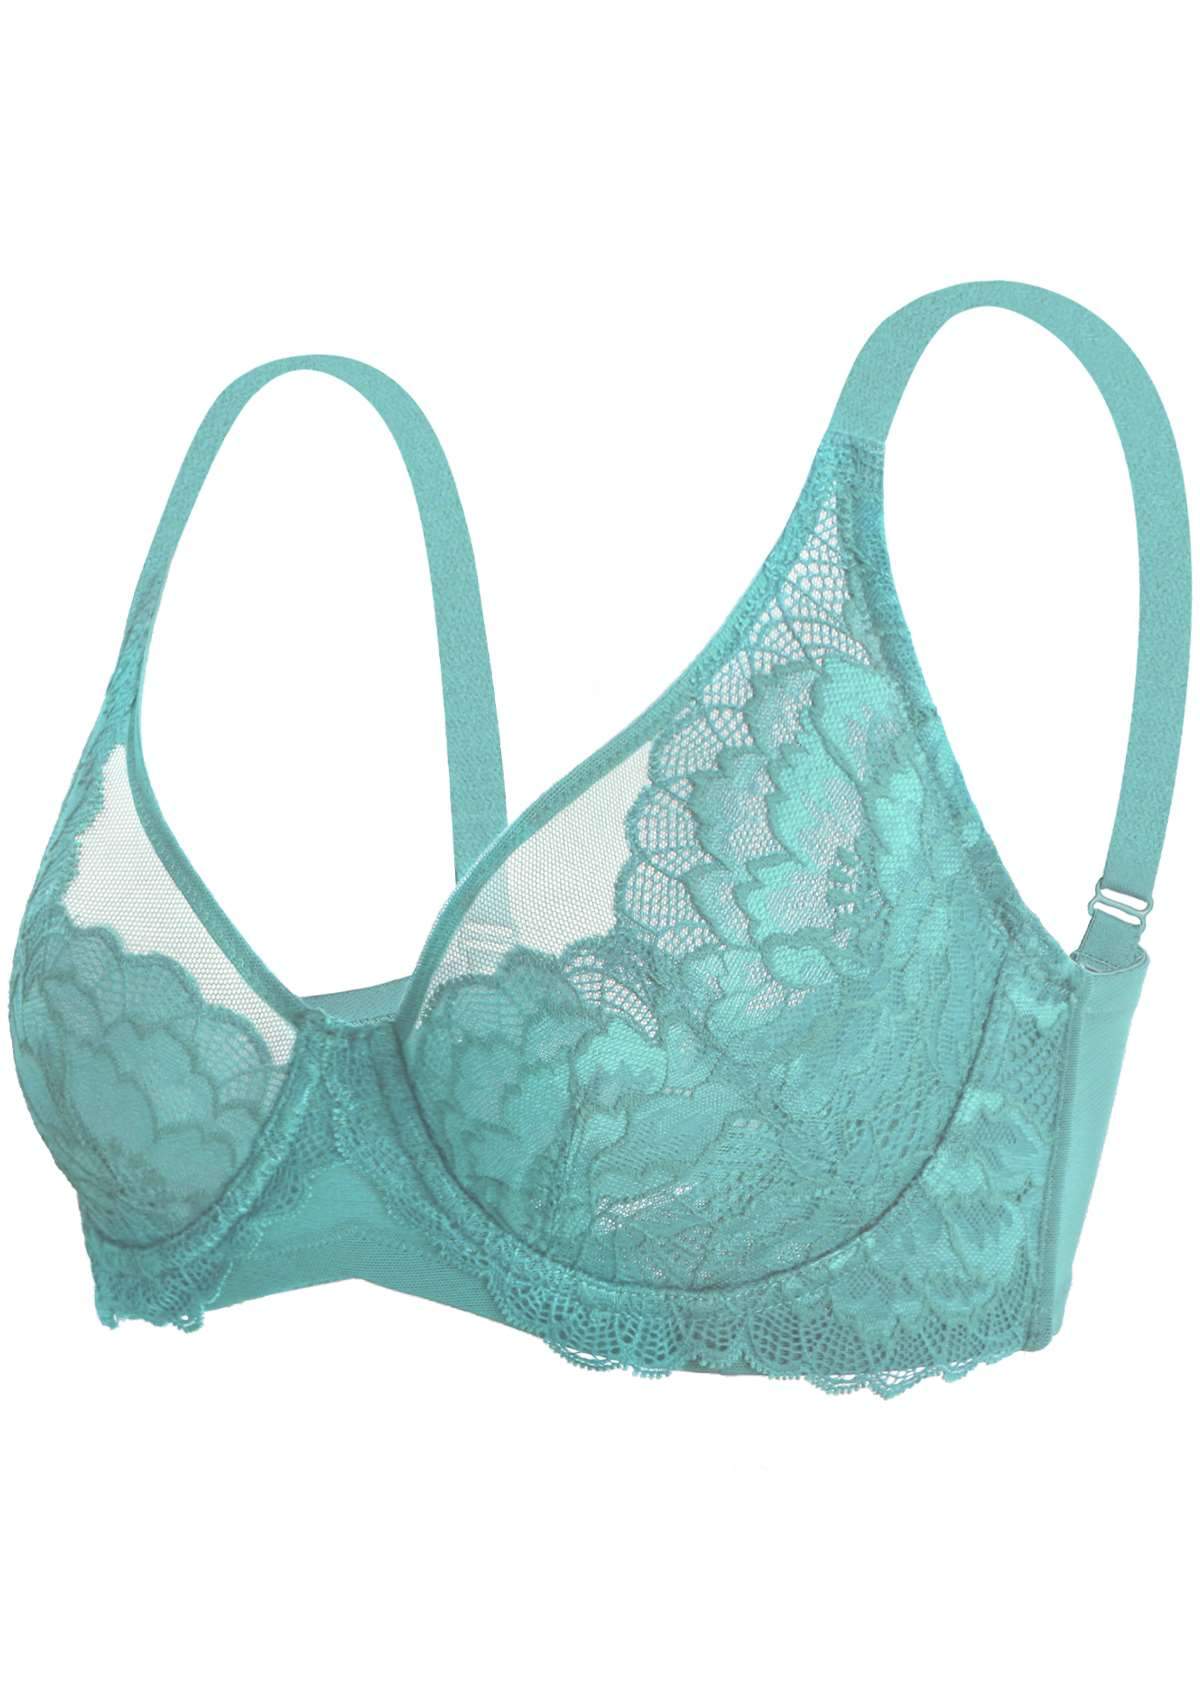 HSIA Peony Lace Unlined Supportive Underwire Bra - Green / 36 / C